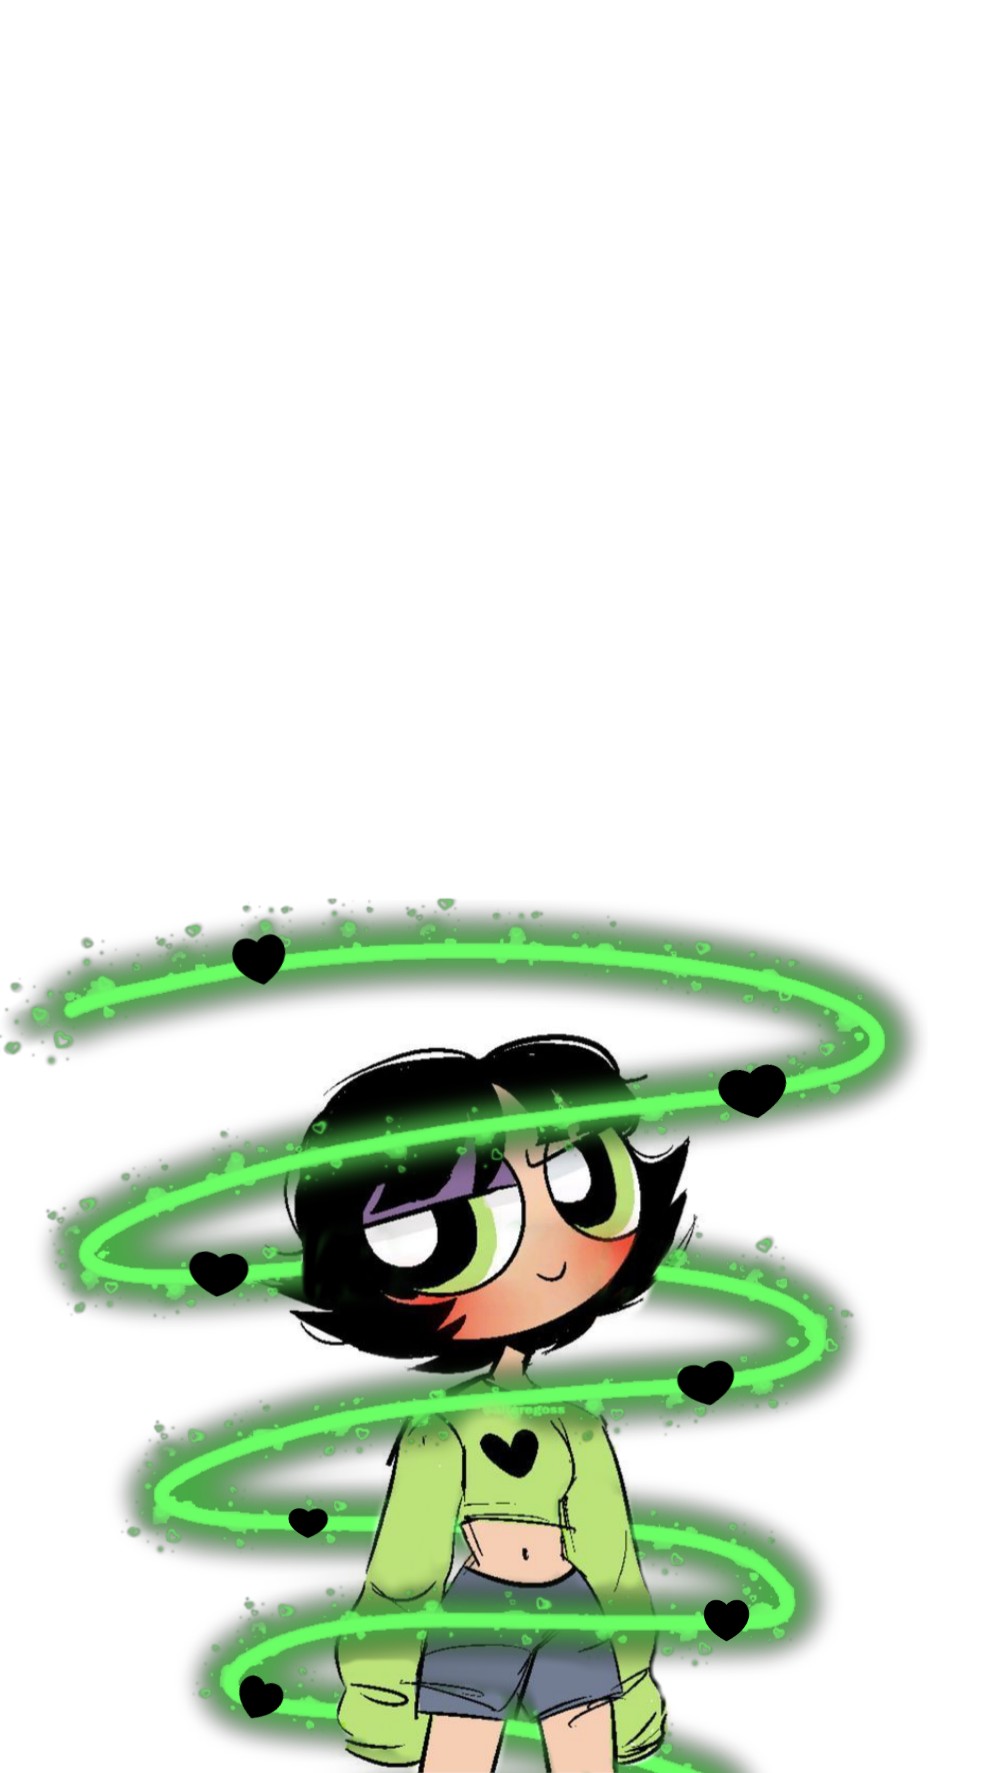 Toedit Powerpuff By A Deleted Account